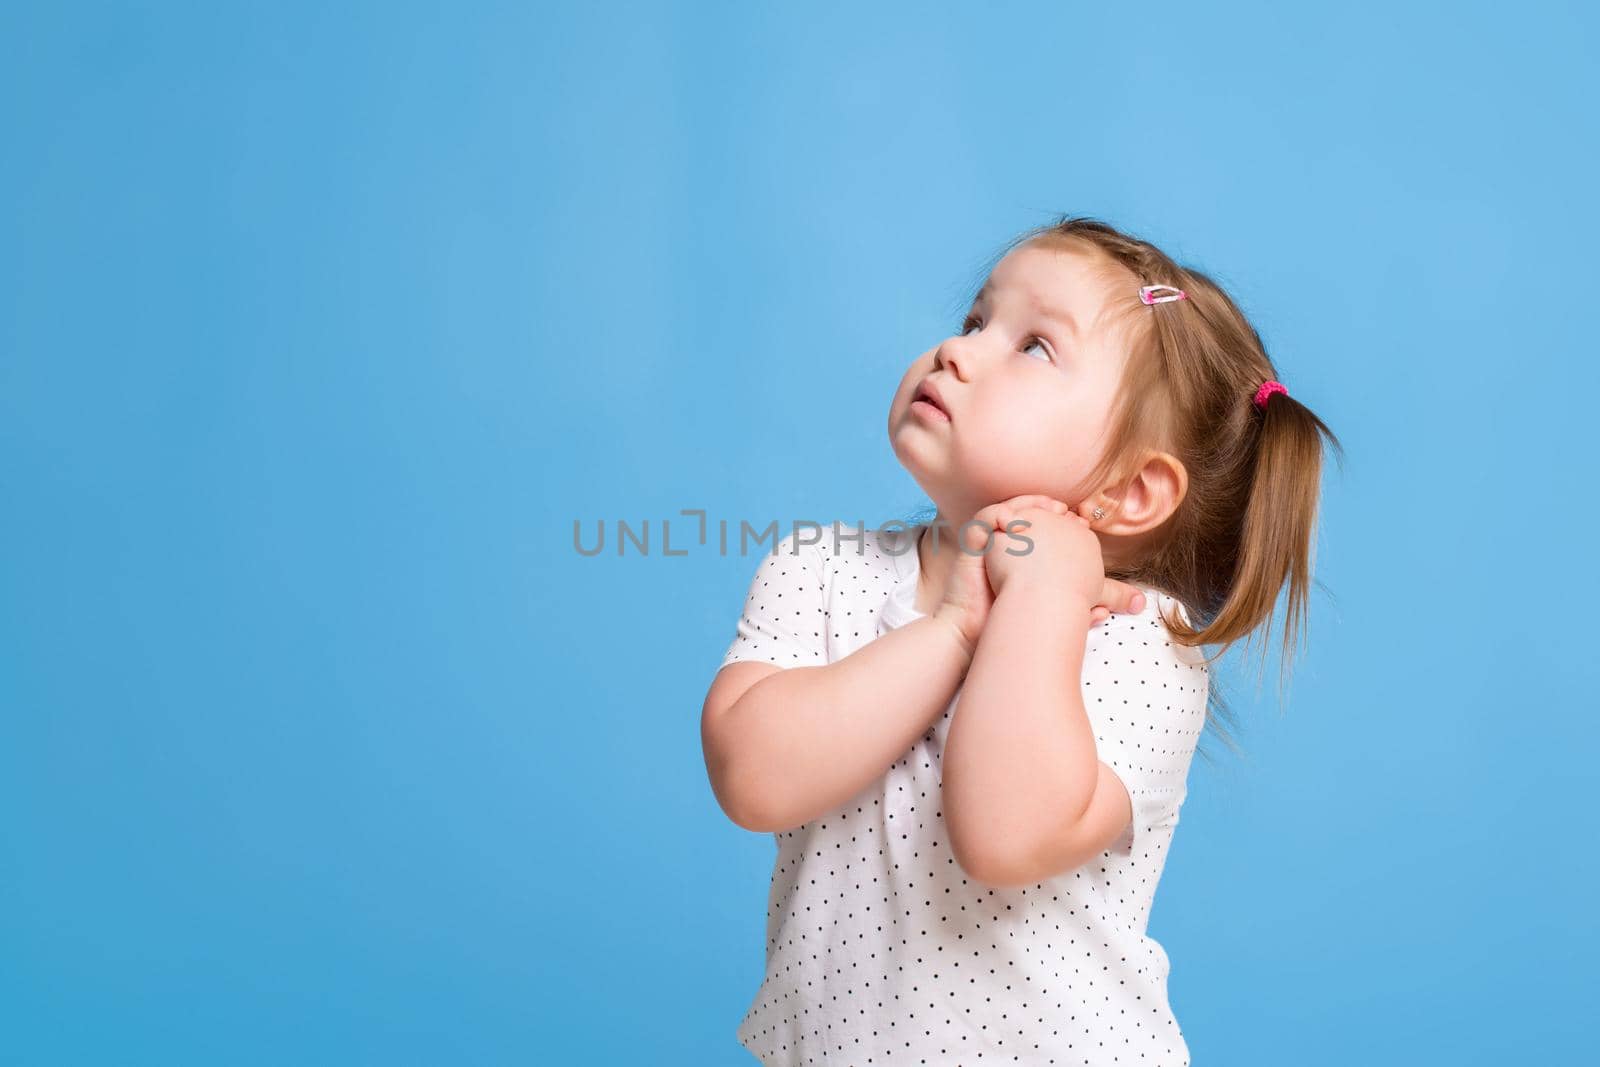 Funny kid in white T-shirt on blue background. Little pretty girl isolated on blue background. Copy space for text. by nazarovsergey